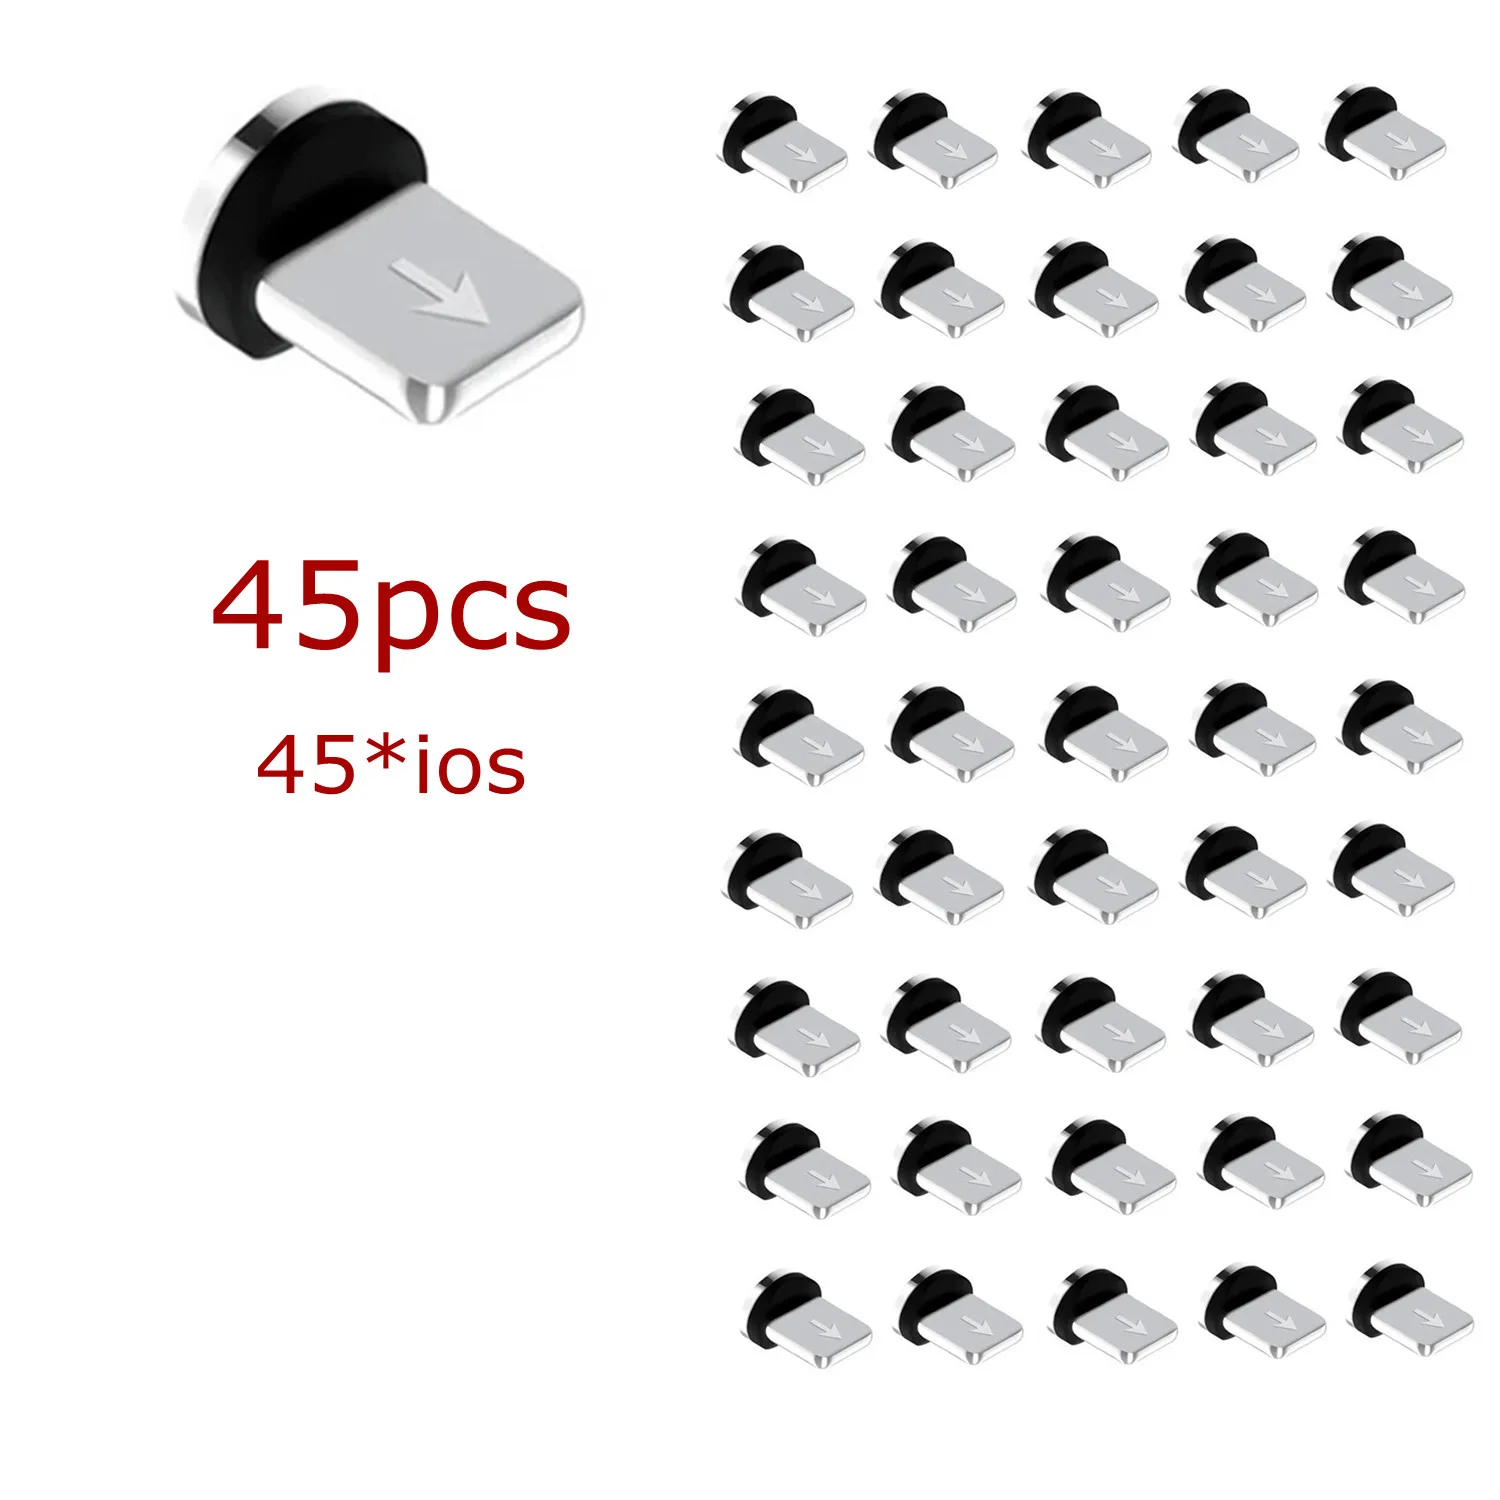 lovebay 45 pcs magnetic tips for iphone samsung mobile phone replacement parts 3 in 1 plug micro converter cable adapter type c free global shipping